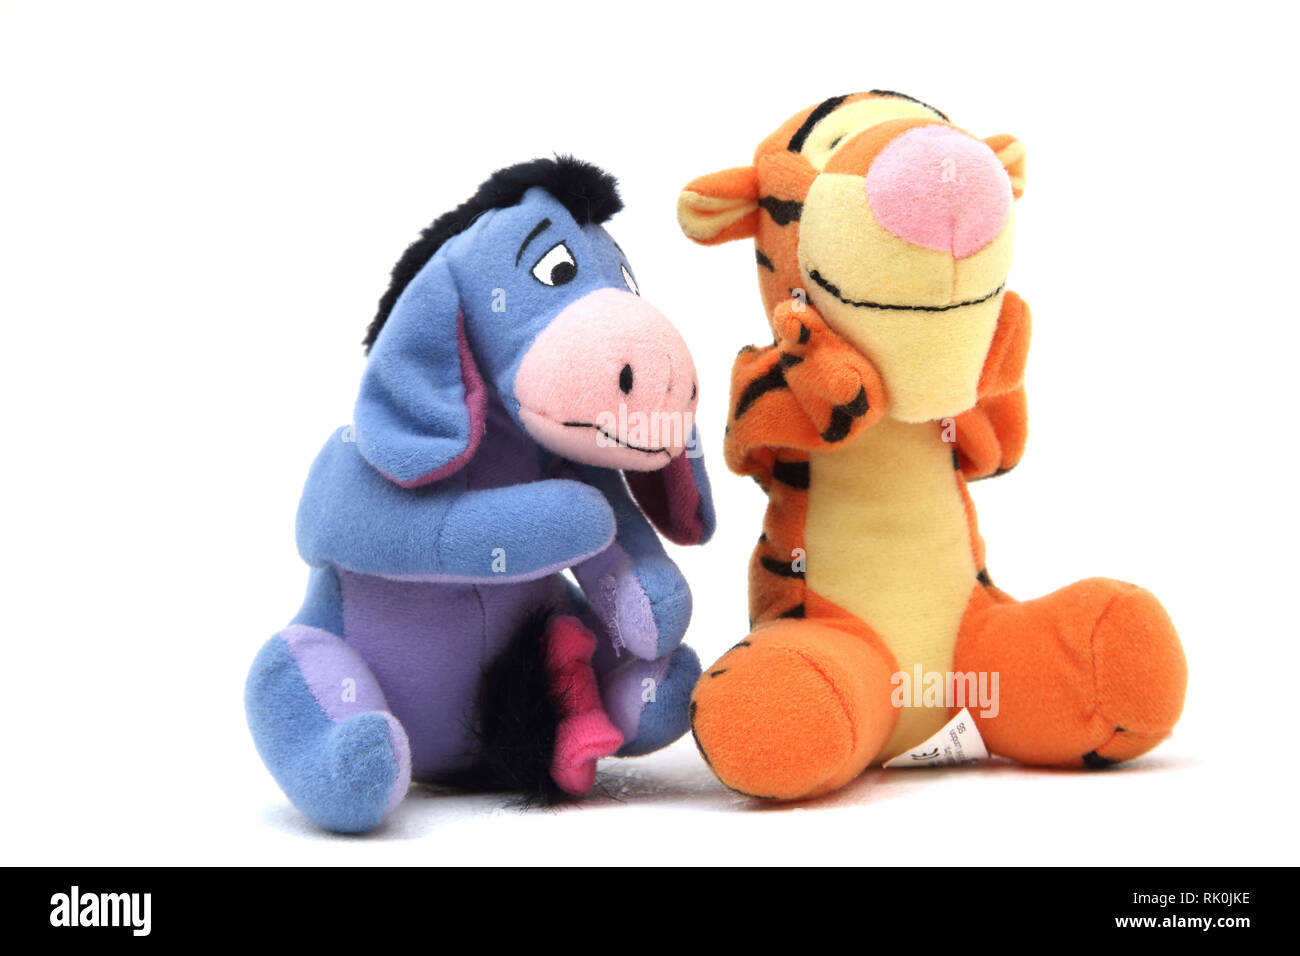 Soft Toy Characters from Winnie the Pooh - Eeyore and Tigger Stock Photo